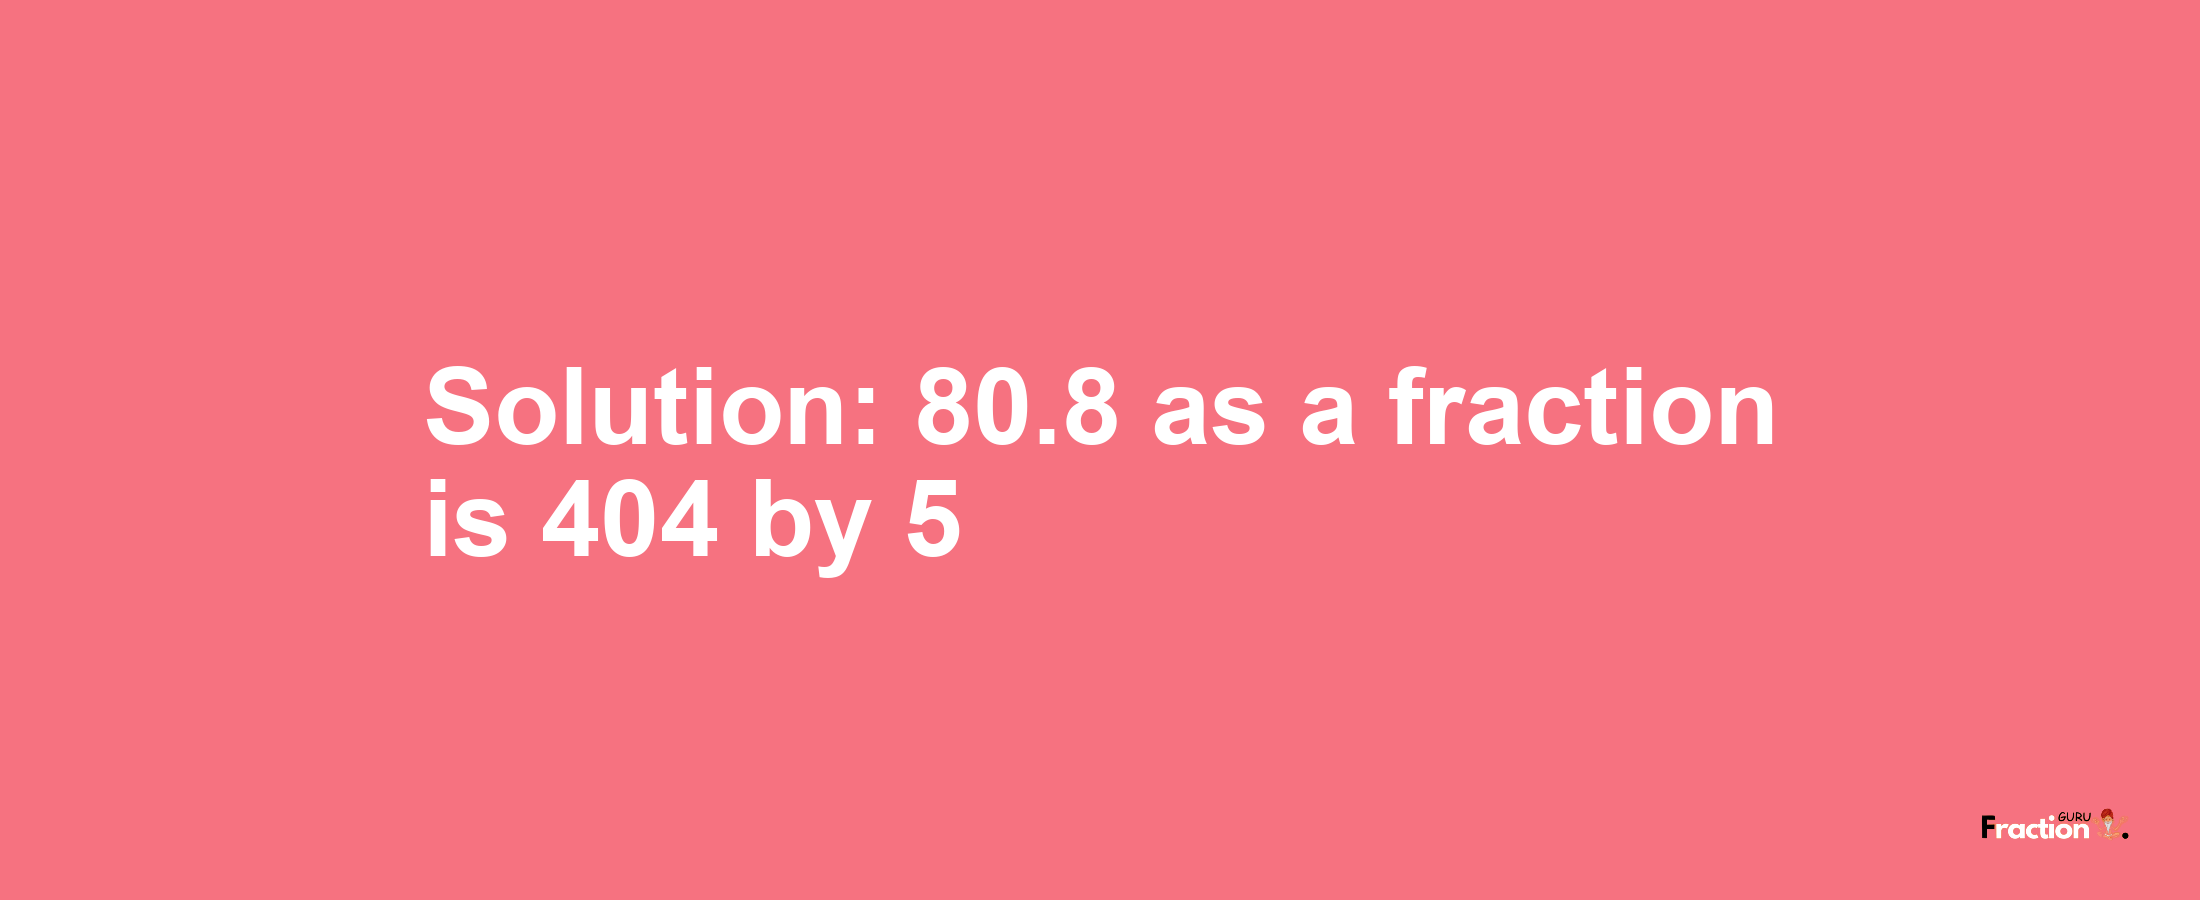 Solution:80.8 as a fraction is 404/5